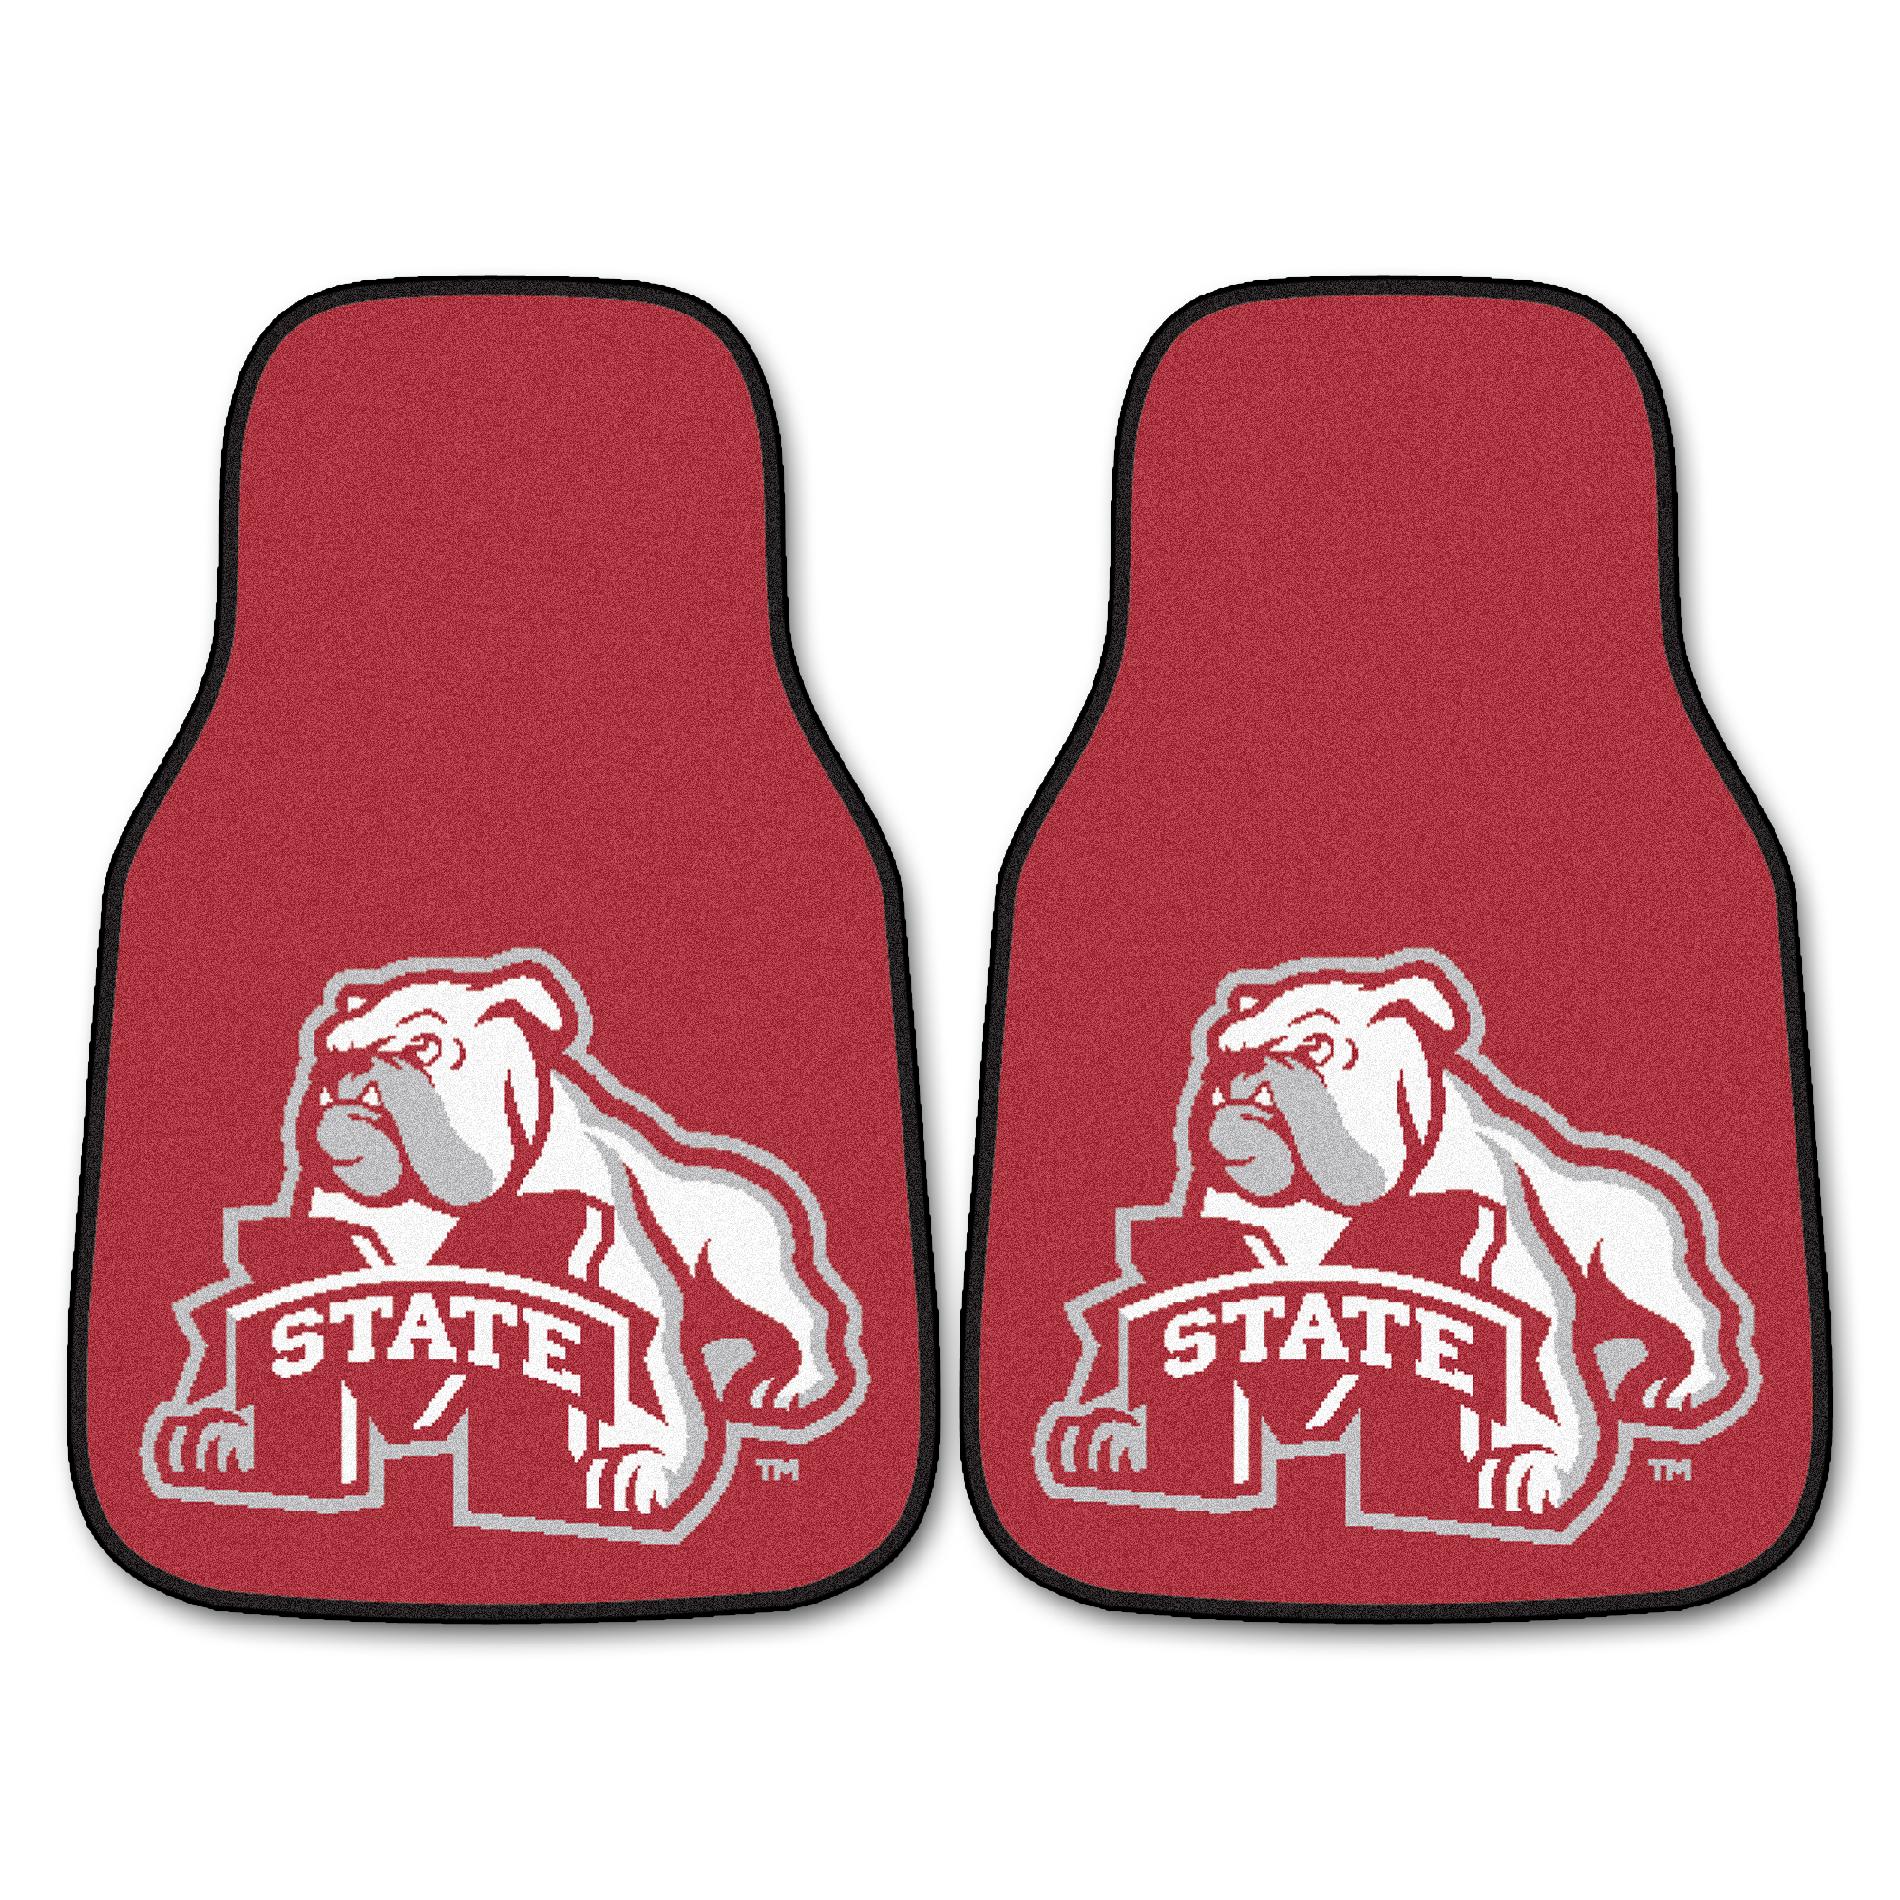 Mississippi State 2-piece Carpeted Car Mats 18" x 27"